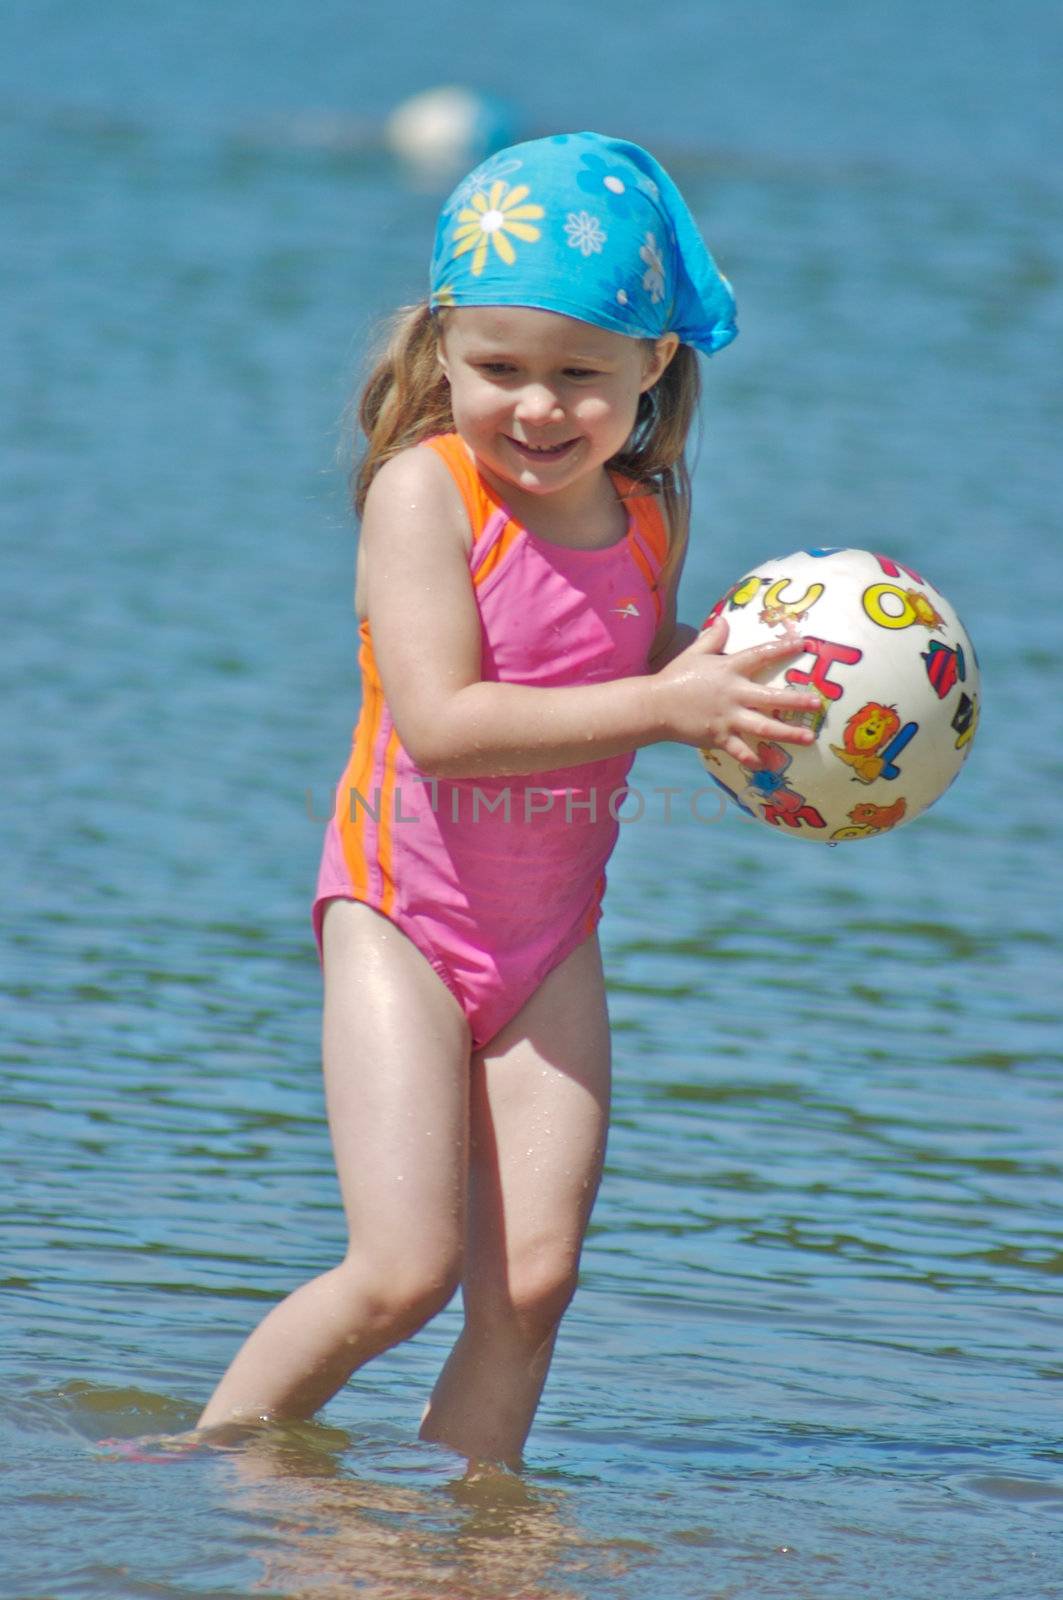 Cute little girl playing with a ball in the water